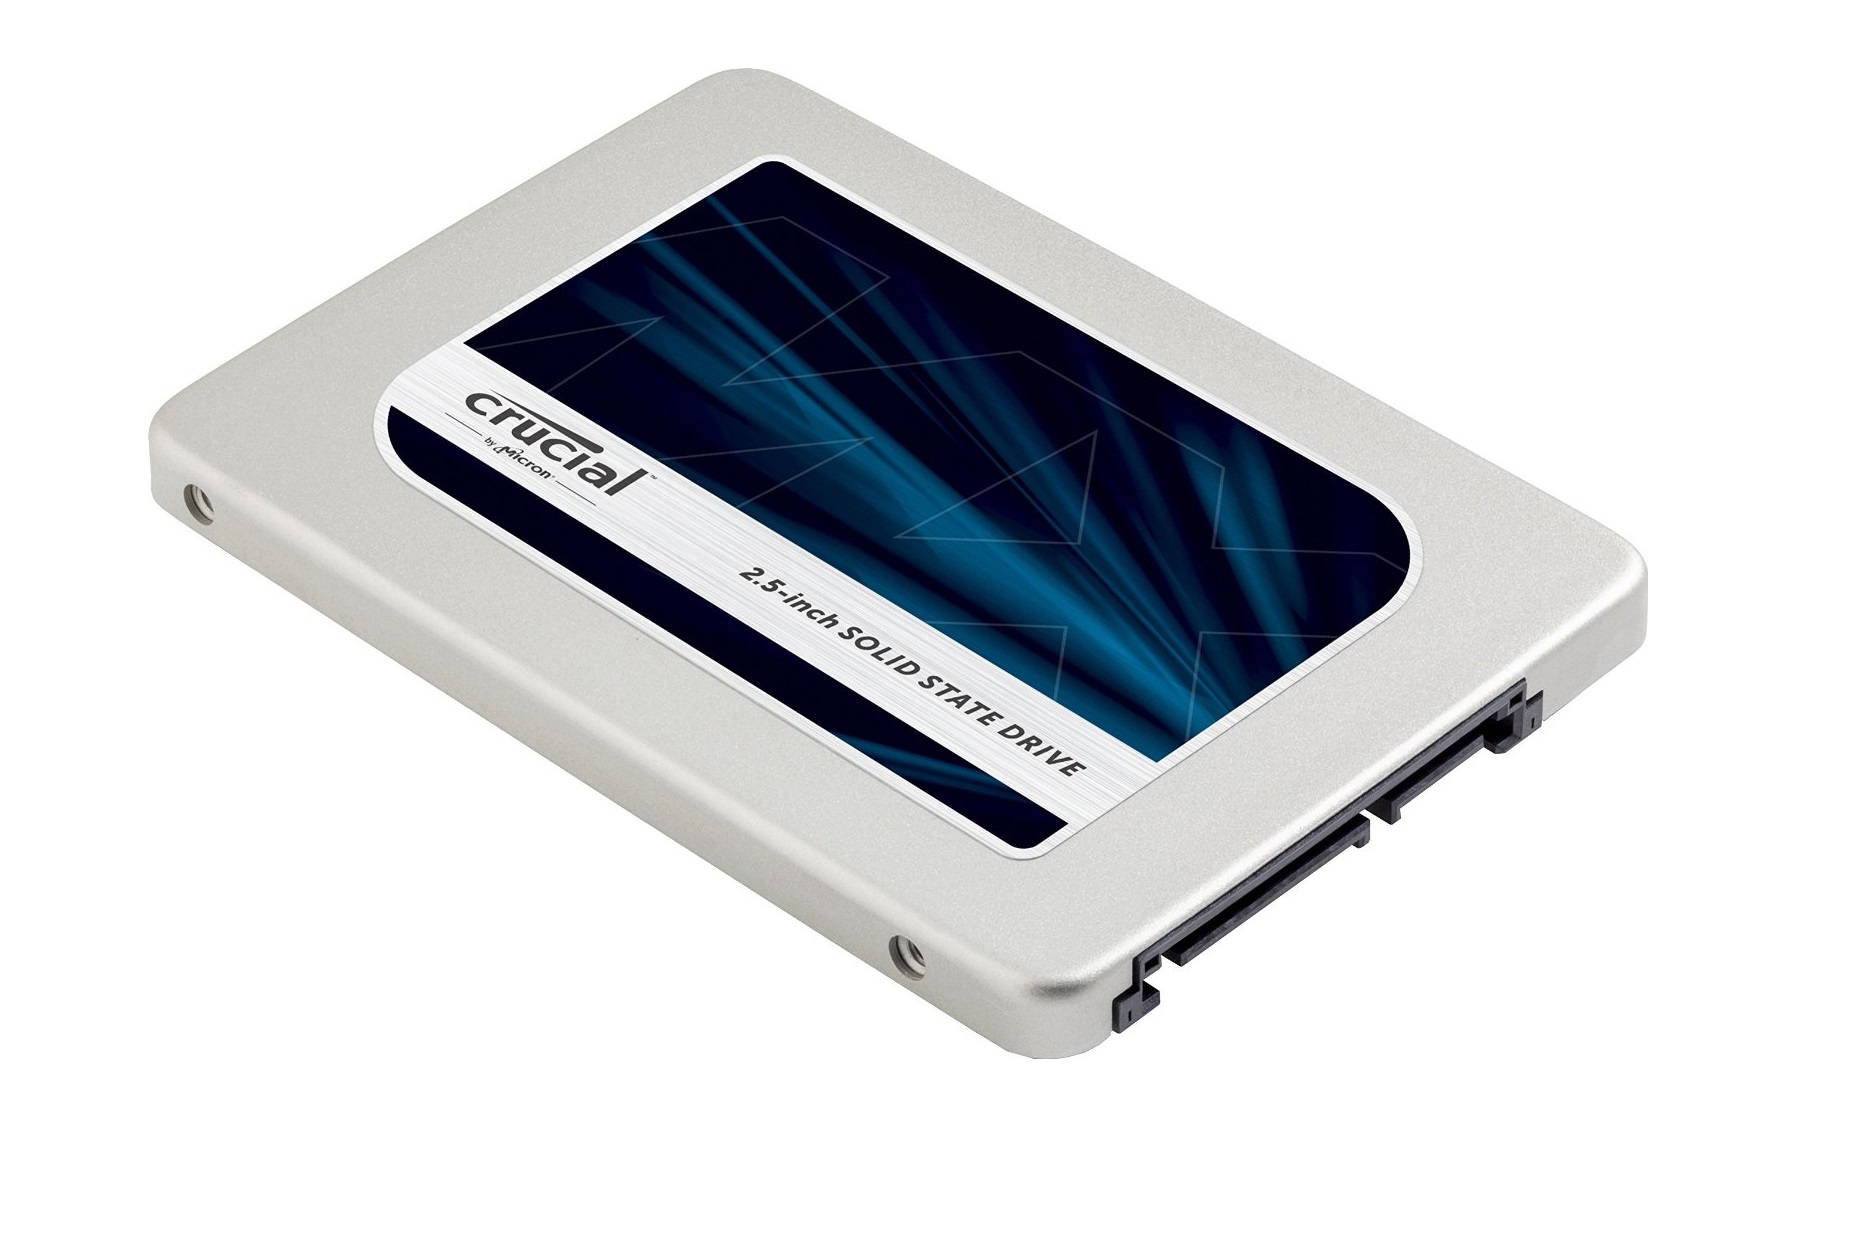 Crucial MX300 SSD Giveaway, Celebrating Crucial’s 20 Year Anniversary!